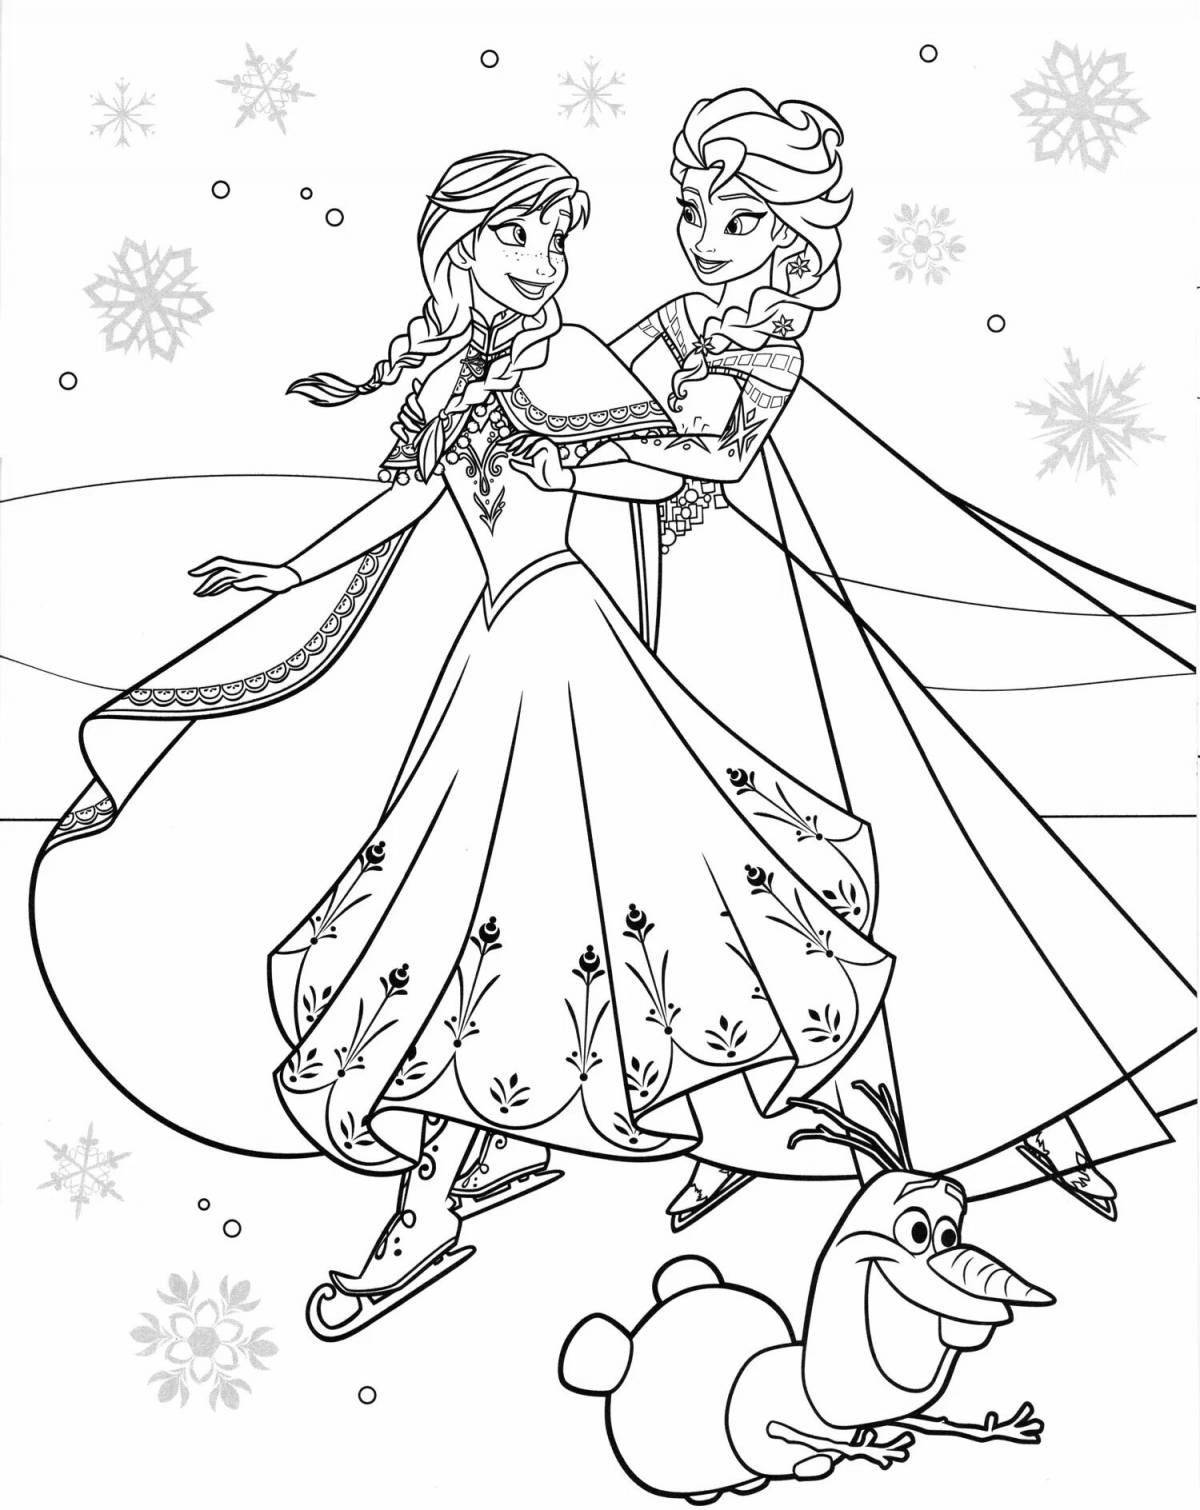 Adorable elsa coloring book for kids 5-6 years old